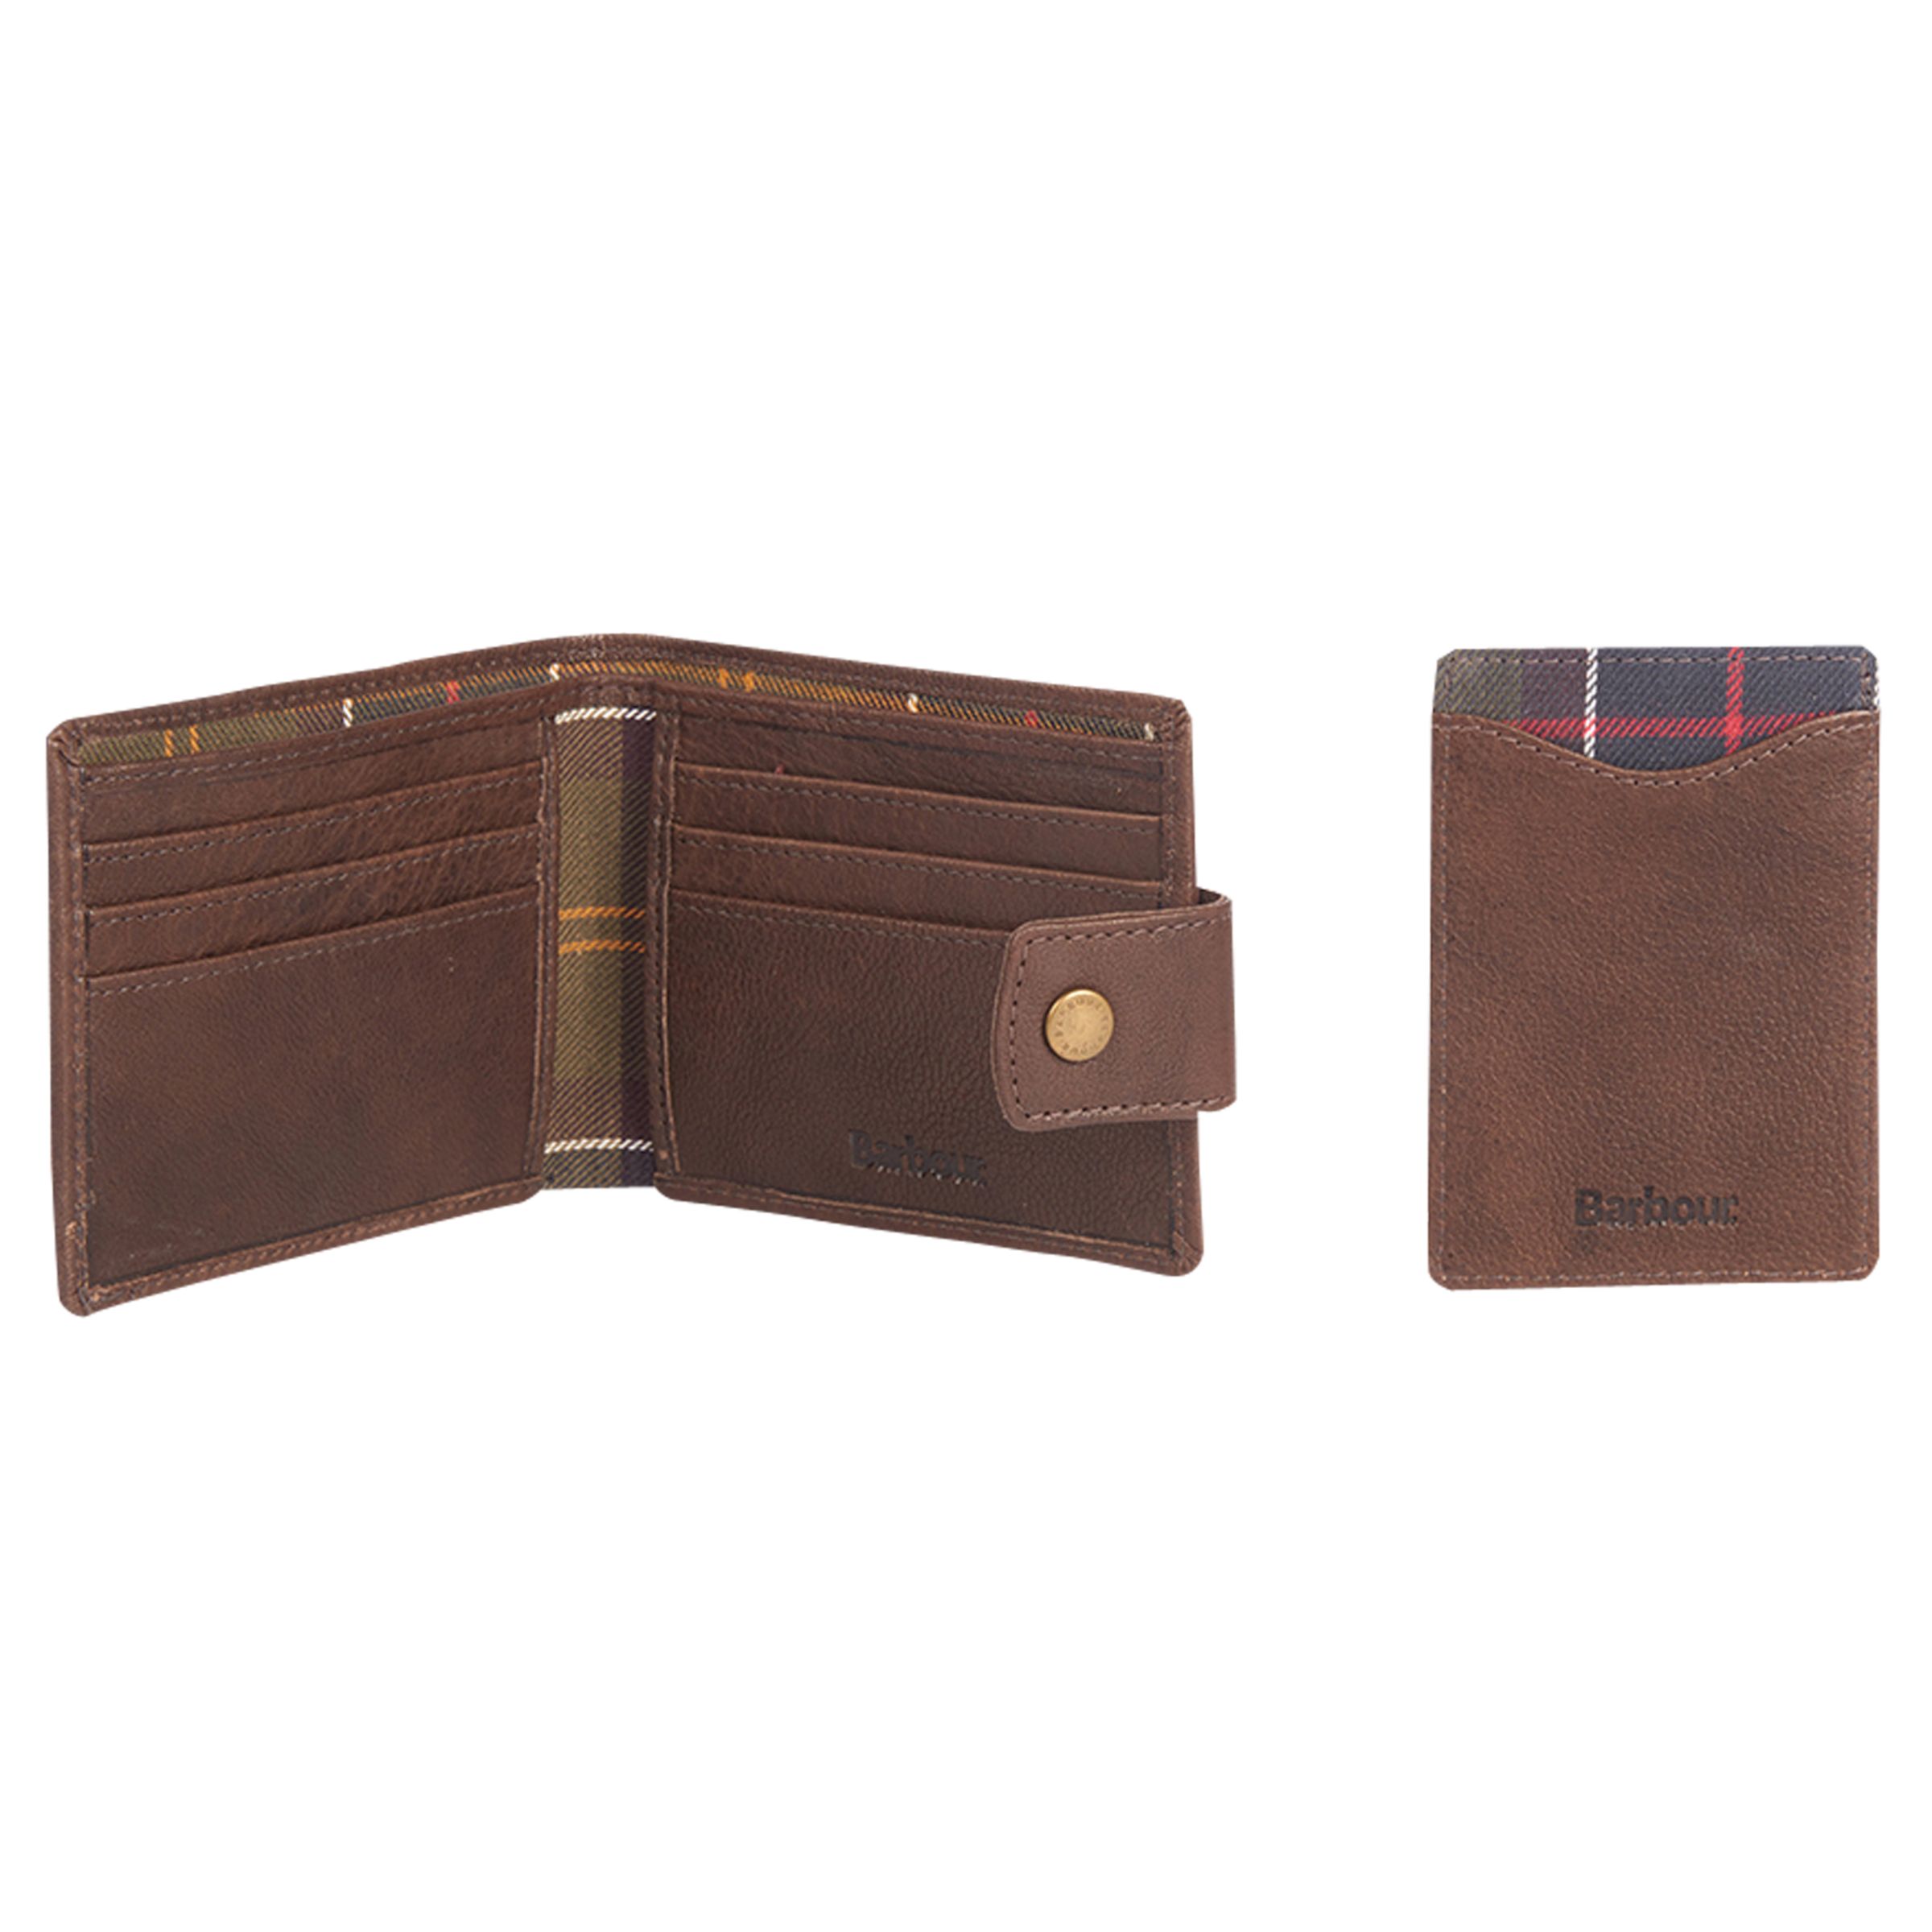 Barbour Leather Wallet and Card Holder Gift Set, Brown at John Lewis & Partners